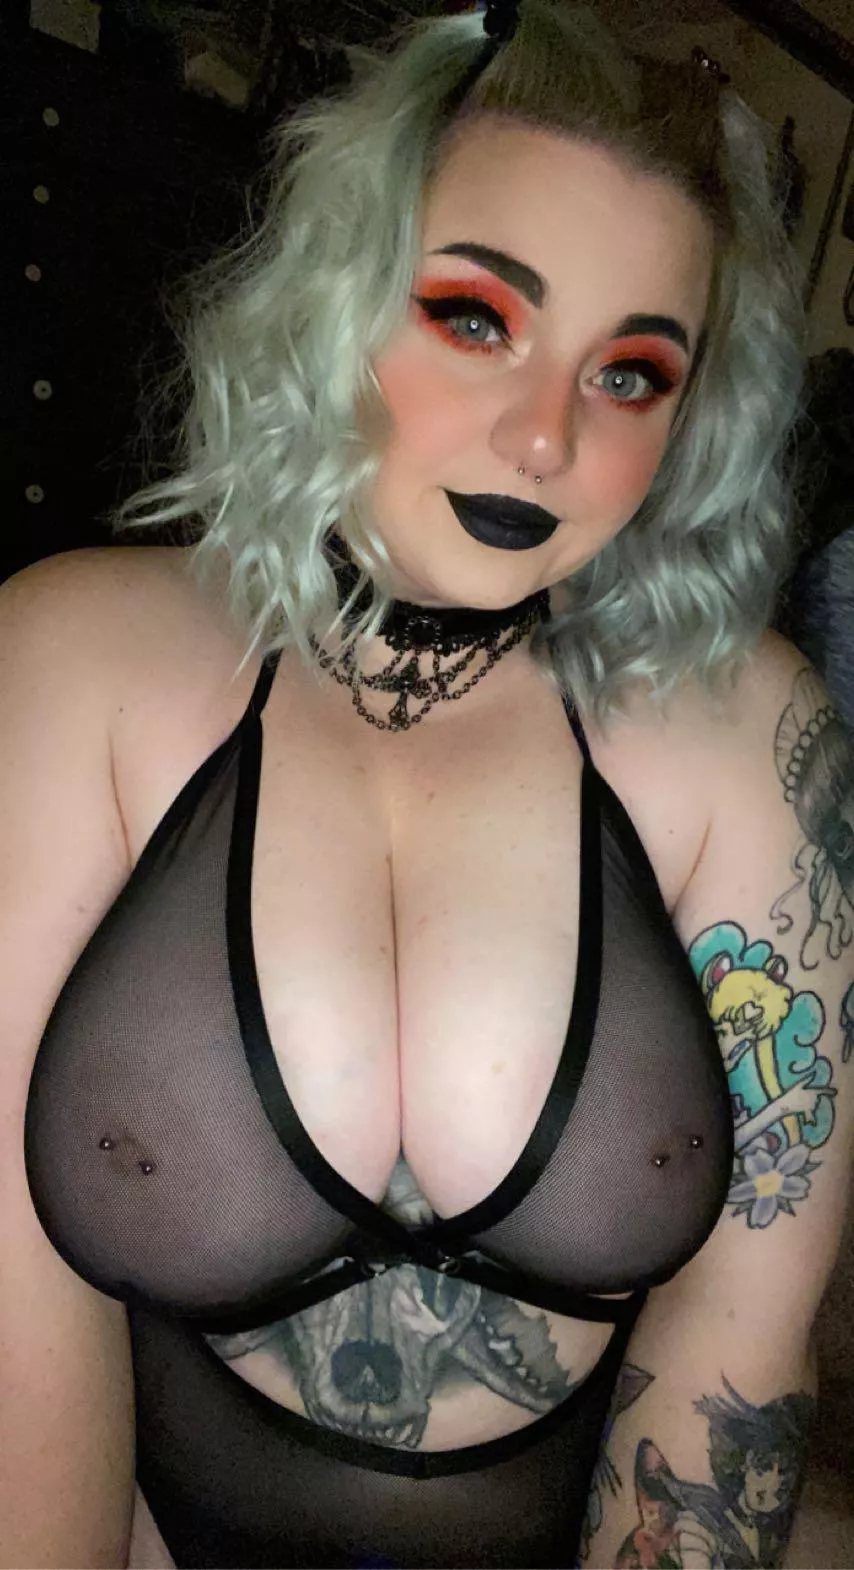 Chubby Goth Fucking - Chubby goth girl at your service ðŸ–¤ nudes by TylerBee96